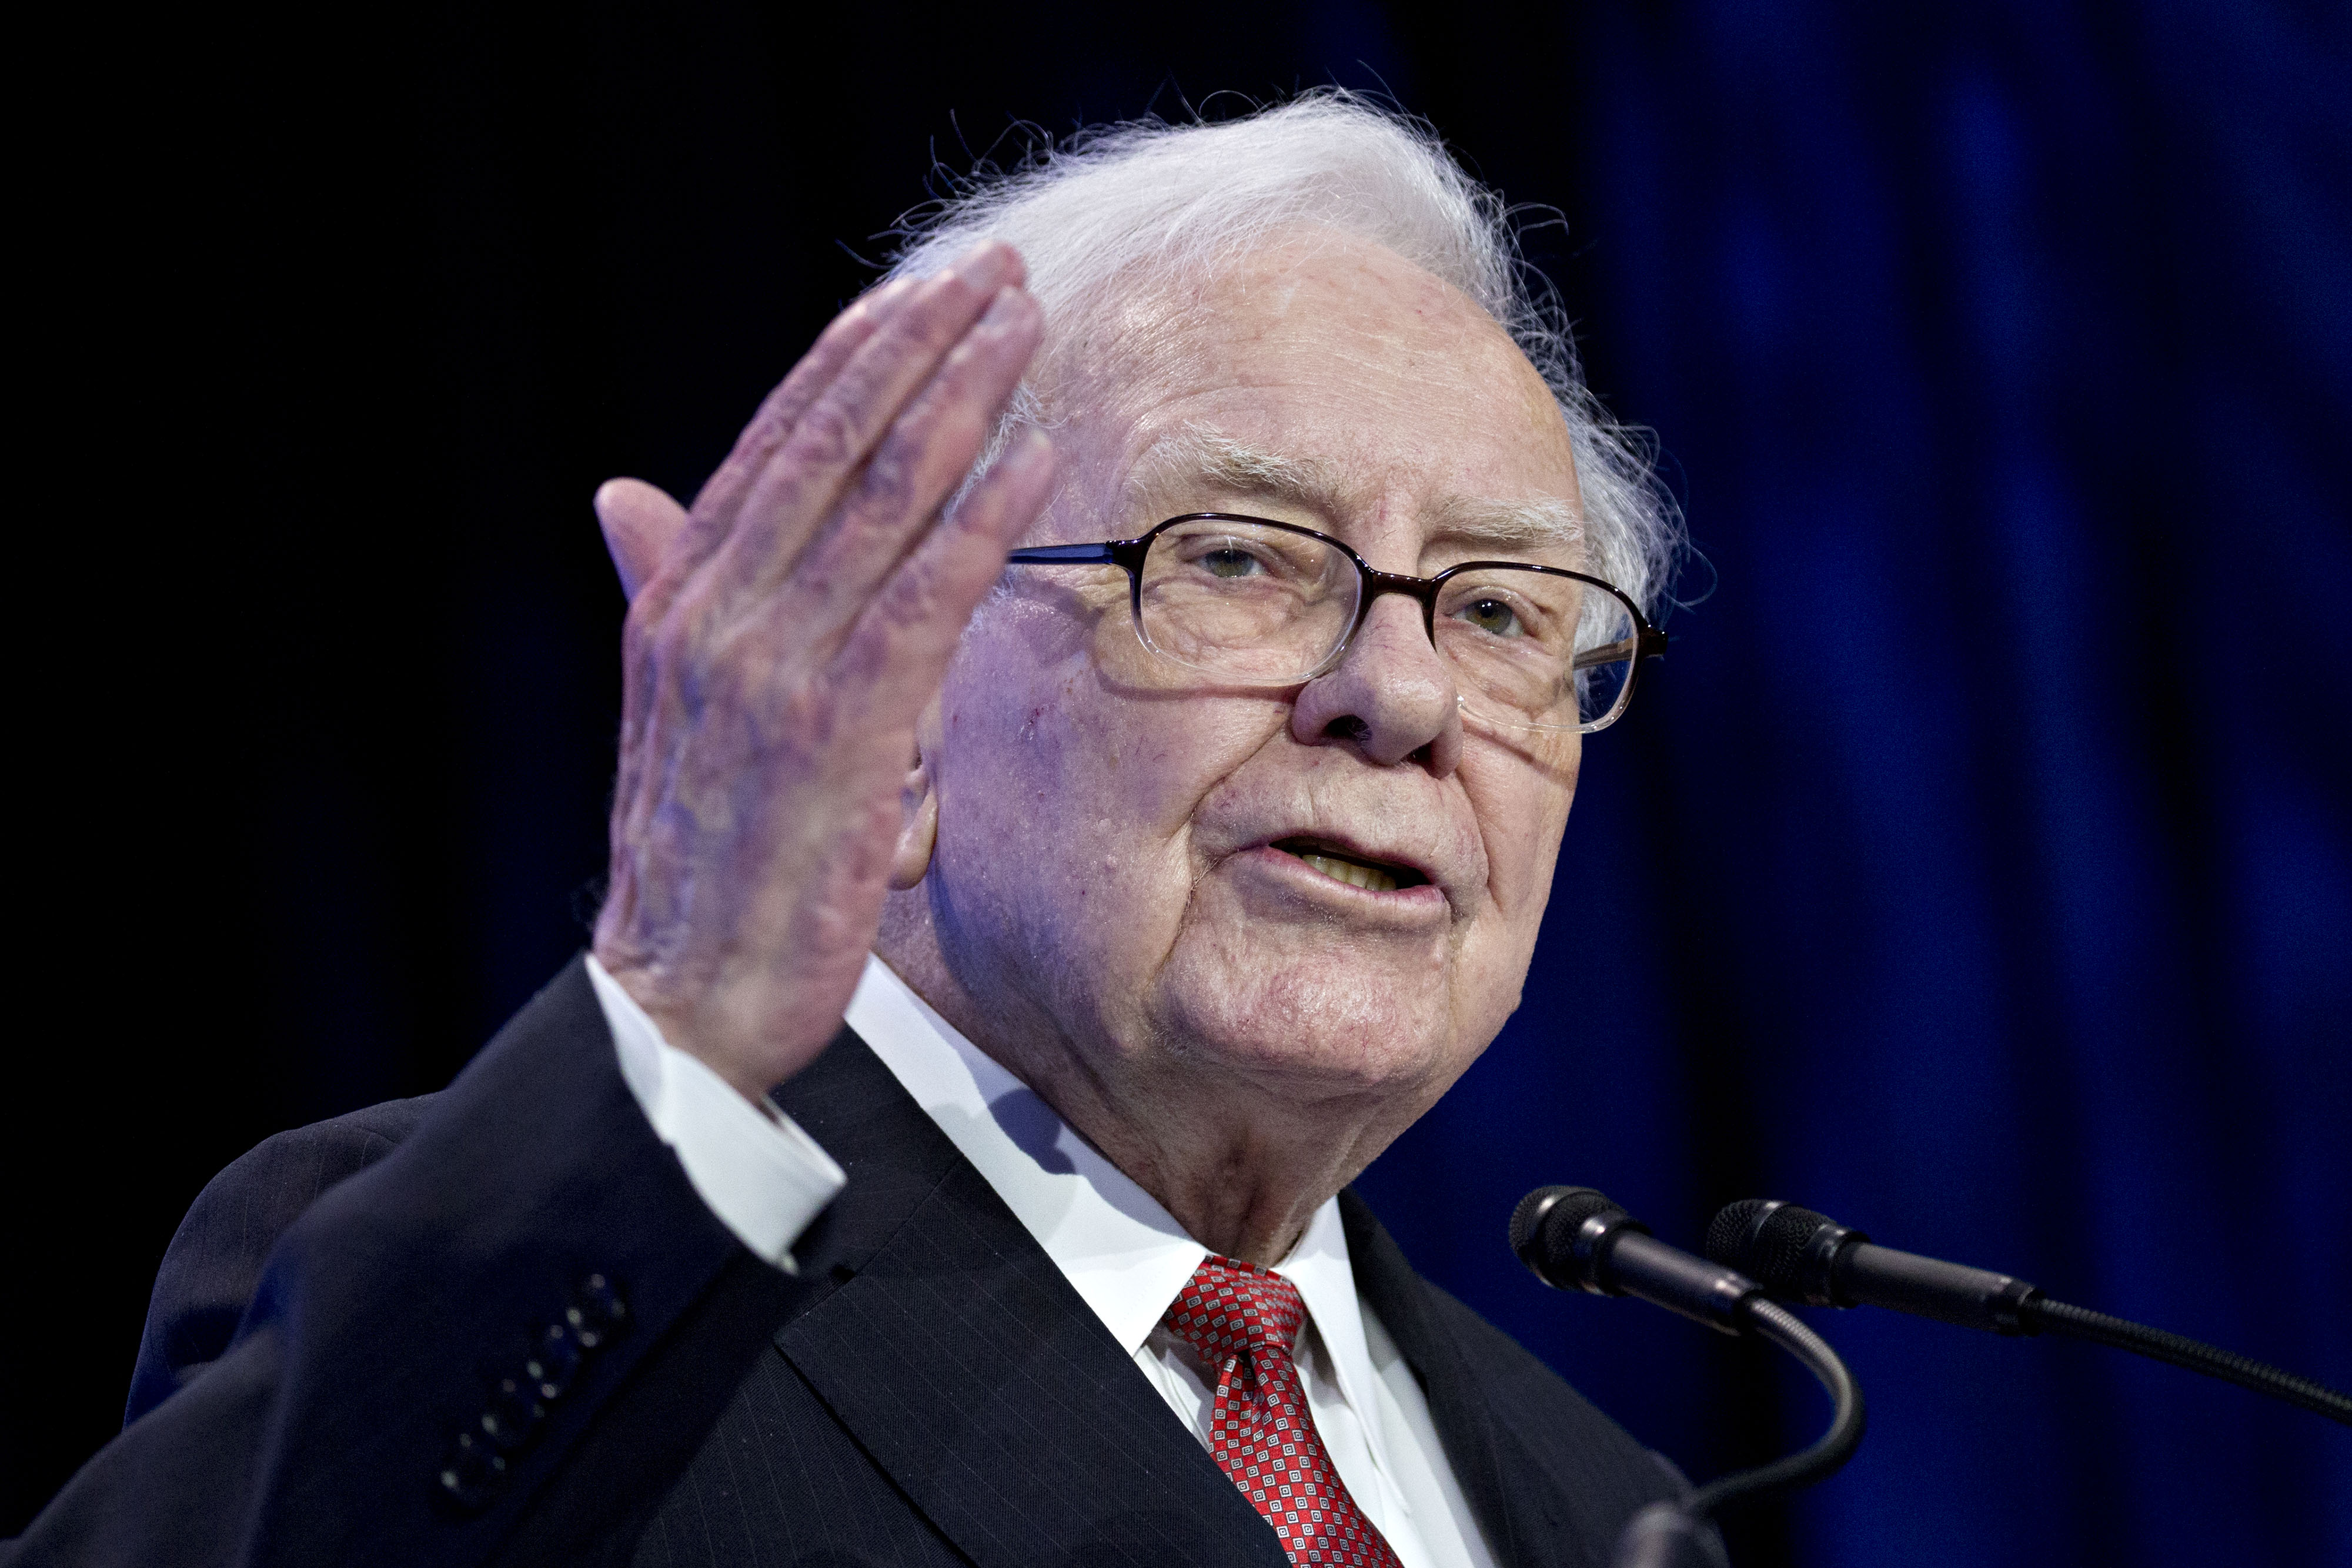 Warren Buffett Just Made a Surprising Prediction About the Economy